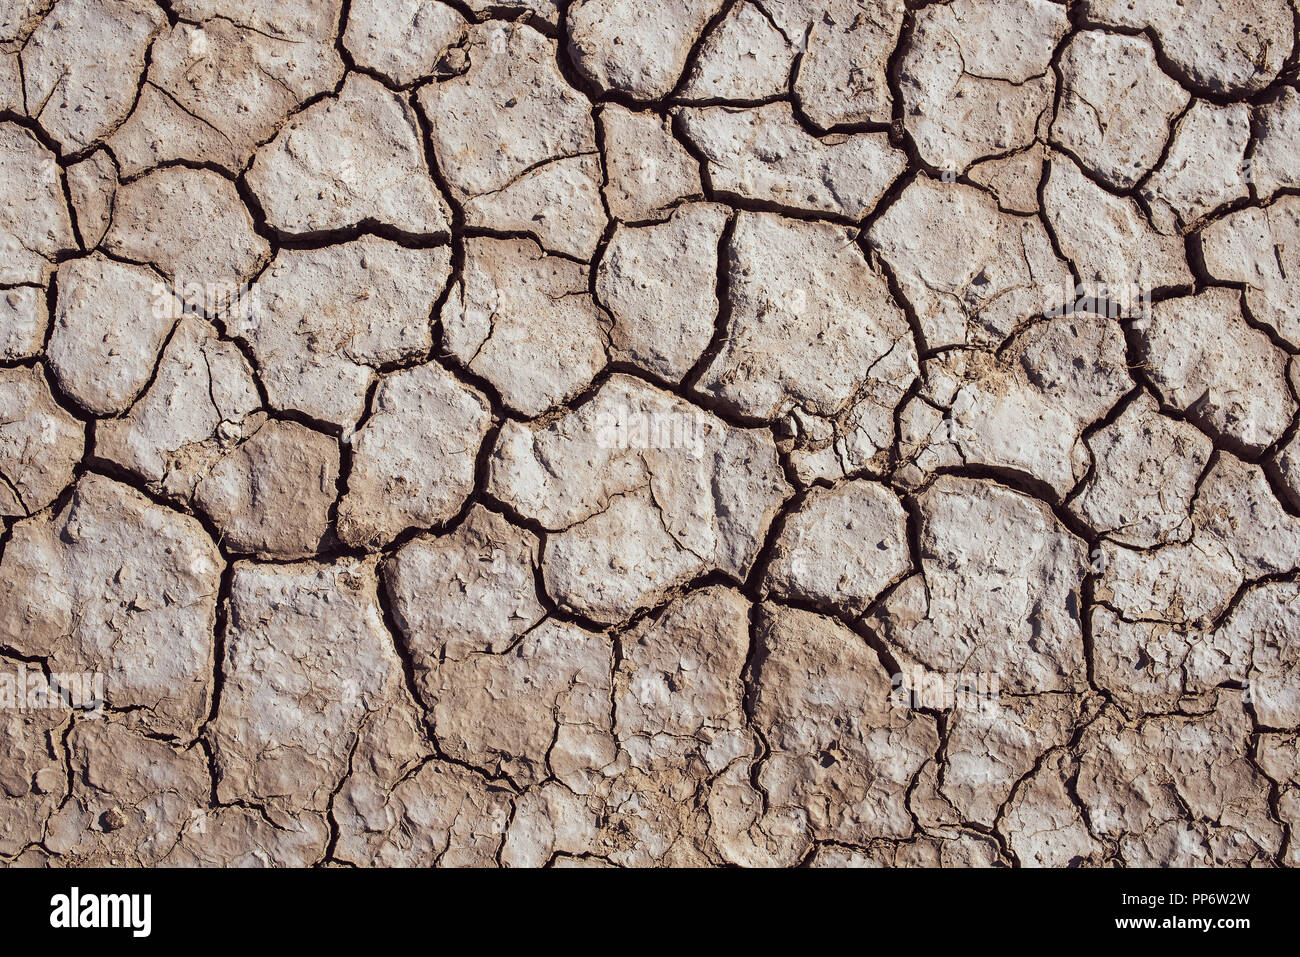 Textured background of cracked dry brown earth Stock Photo